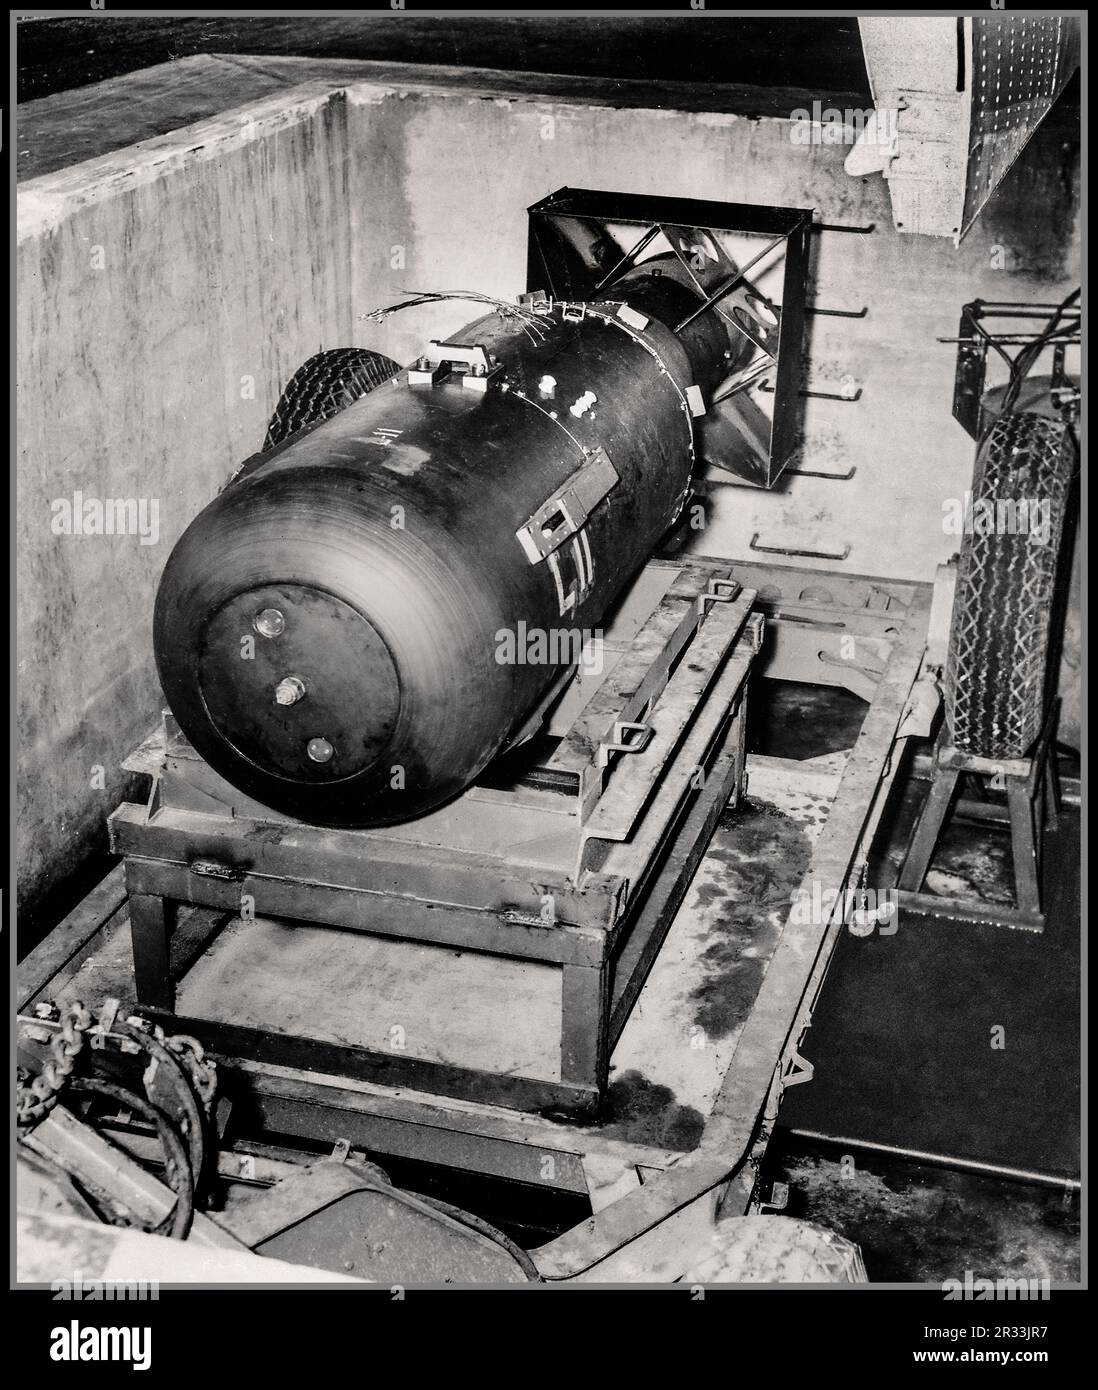 ATOMIC ATOM  NUCLEAR BOMB HIROSHIMA  WW2 A-Bomb. LB (Little Boy) unit on trailer cradle in pit on Tinian Island, before being loaded into aircraft Enola Gay's bomb bay. [Note bomb bay door in upper right-hand corner.] , 08/1945.  3.05 meter long first tactical nuclear bomb 'Little Boy' which is about to be loaded in to a B-29 plane bound for Hiroshima Japan. This bomb will later cost the lives of more than 70,000 people. Stock Photo